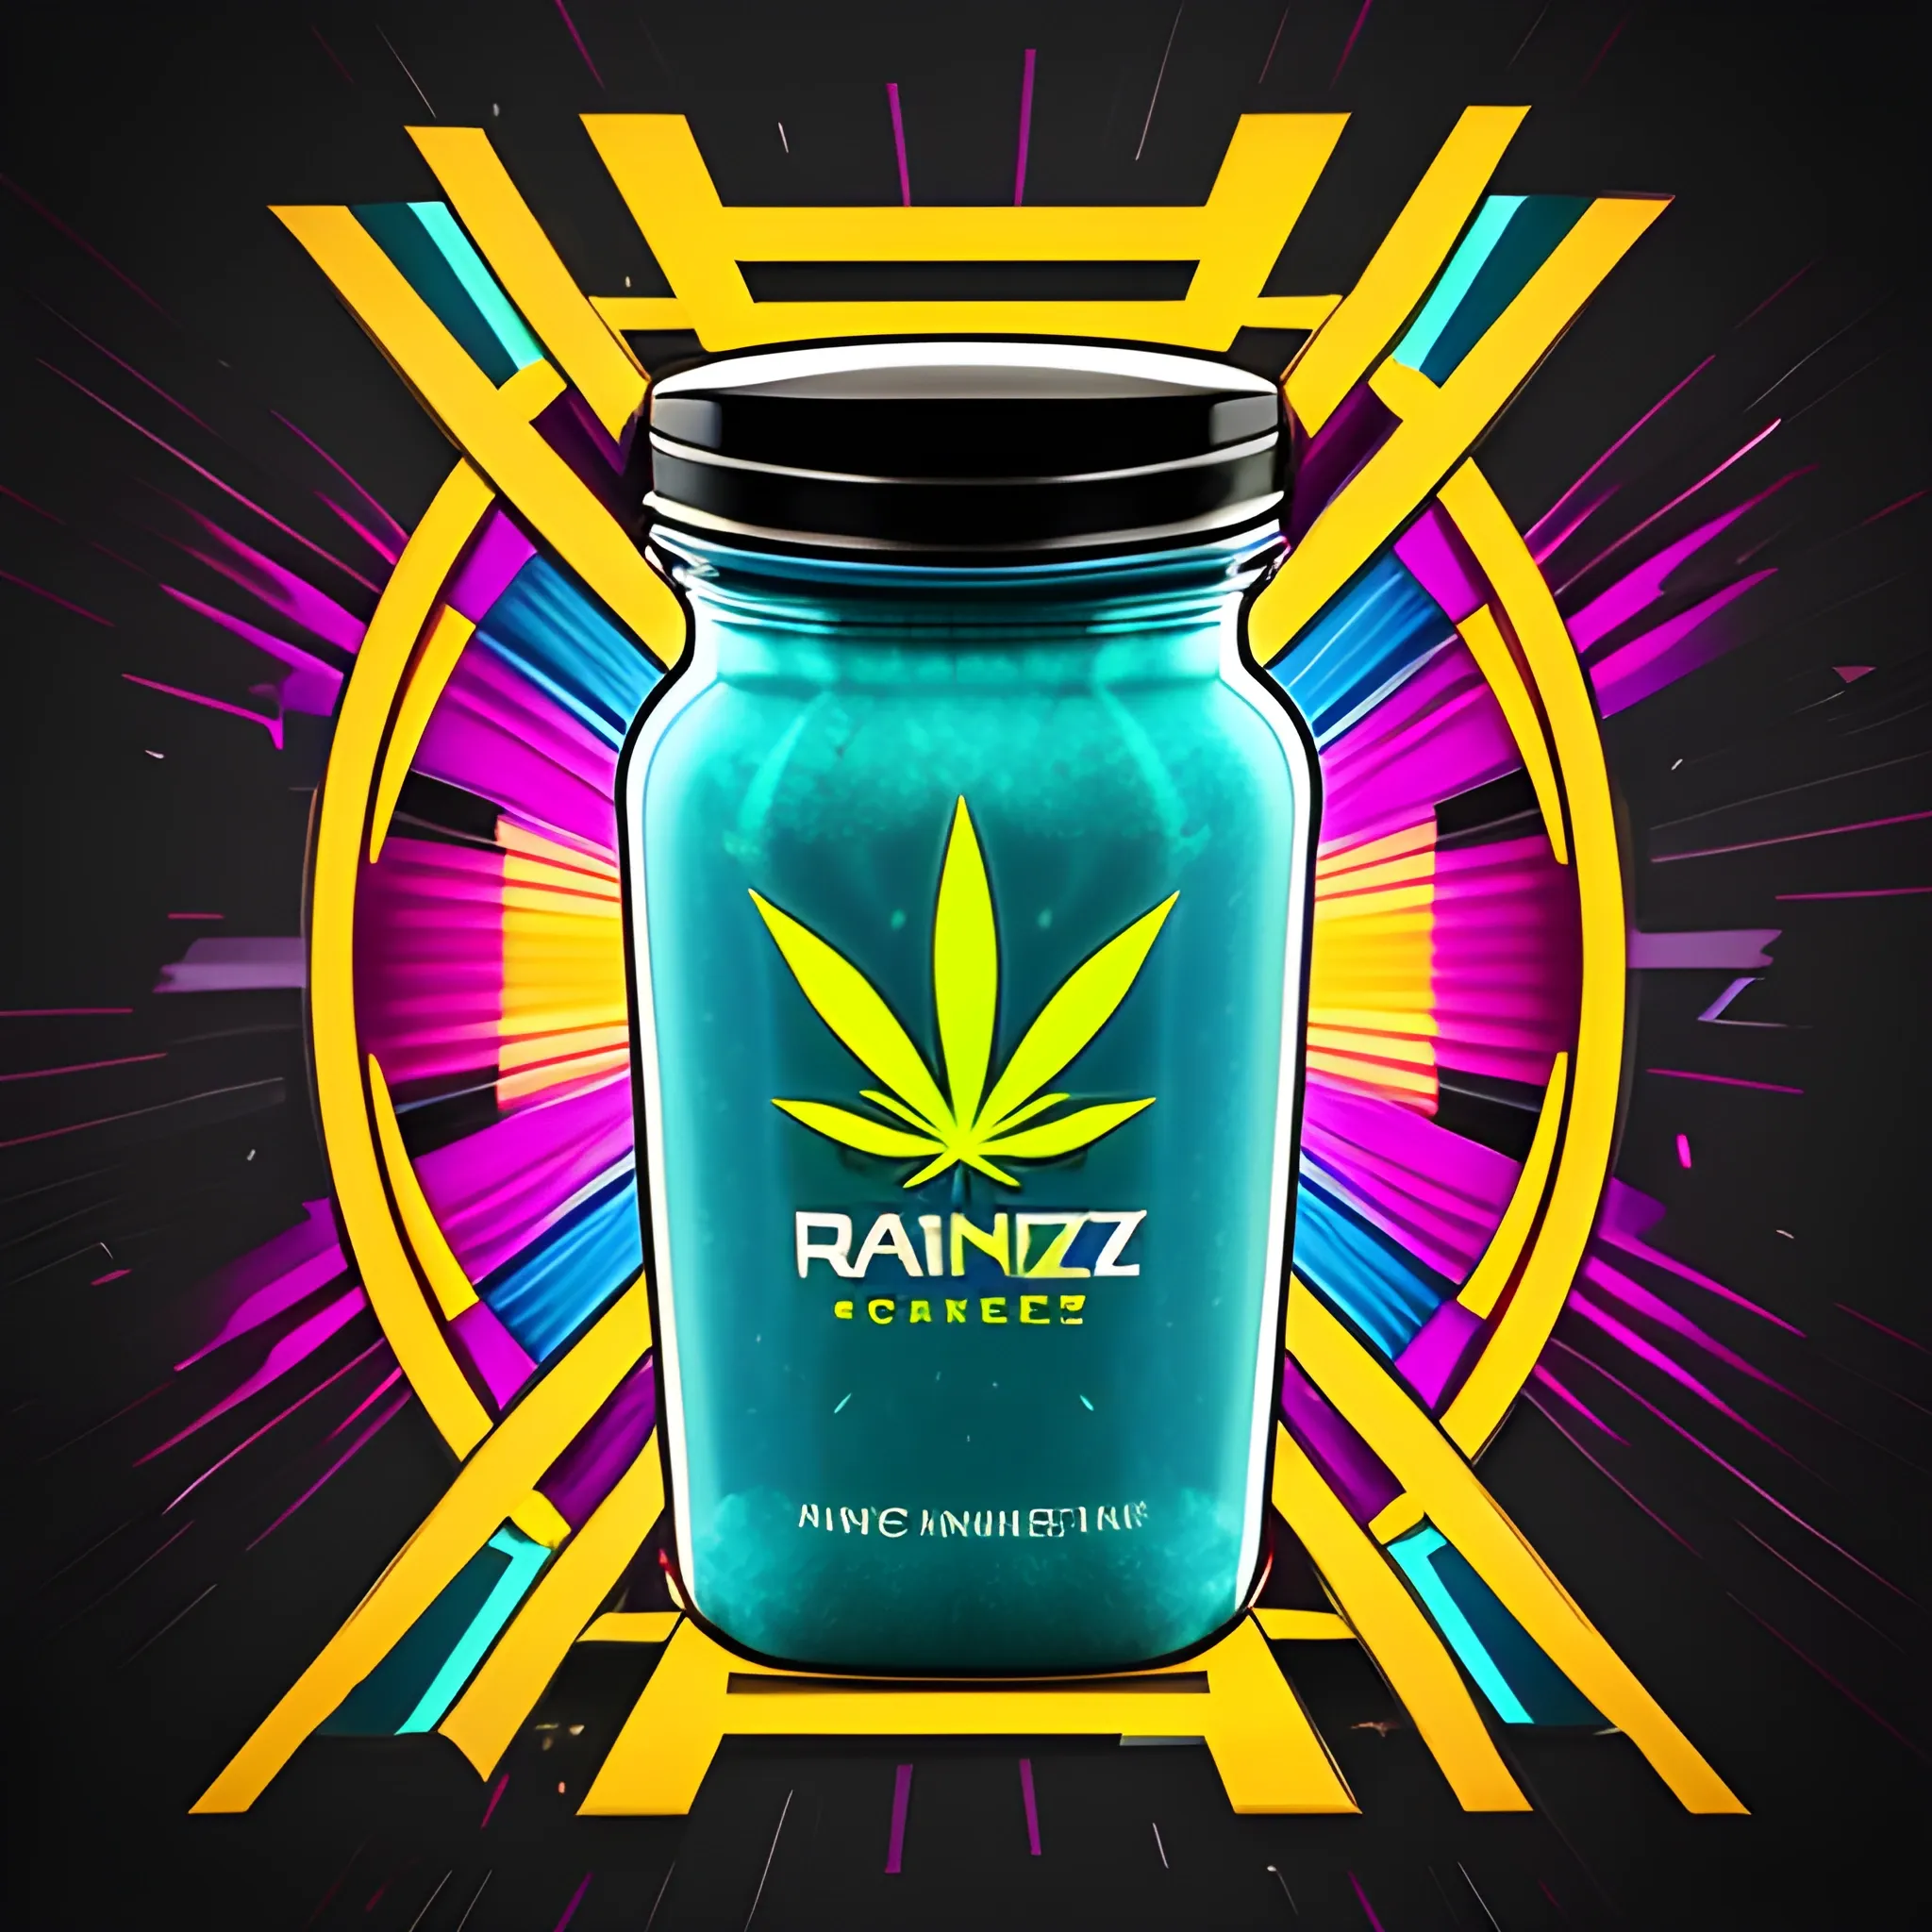 Create a vibrant and edgy label design for 'Rainbow Razz' cannabis jar, targeting a youthful, urban audience. Incorporate elements that reflect a dynamic cityscape, graffiti-inspired artwork, and a sense of nightlife energy. Utilize bold, modern fonts and vivid color schemes to evoke a sense of excitement and style. Emphasize the rebellious and adventurous spirit of the brand, while maintaining a clean and eye-catching layout. Remember to incorporate the 'GEMZ' logo prominently. Get creative with the composition to make it stand out on the shelf and appeal to the young, trendsetting demographic